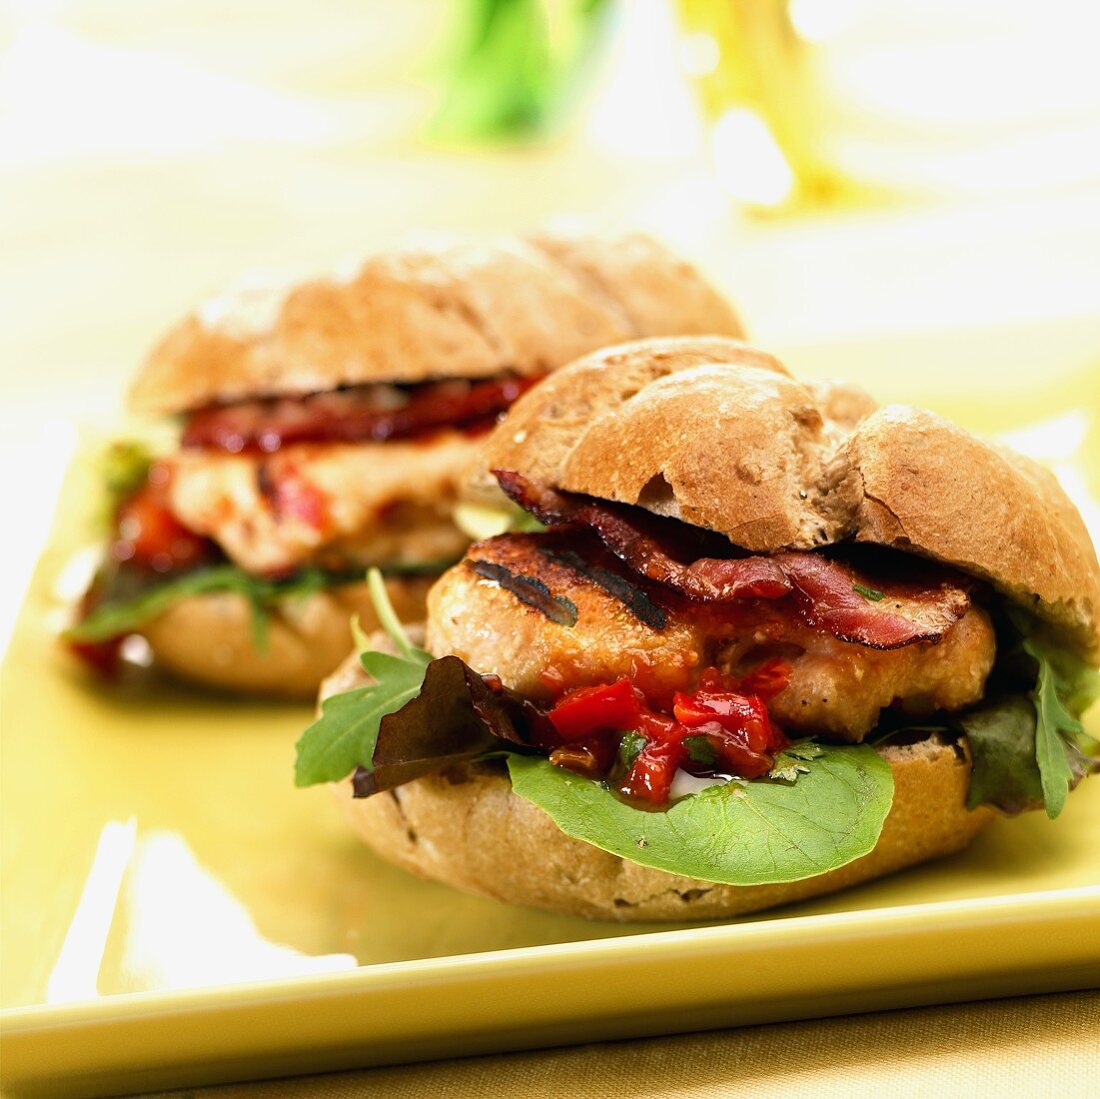 Two chicken burgers with bacon and barbecue sauce